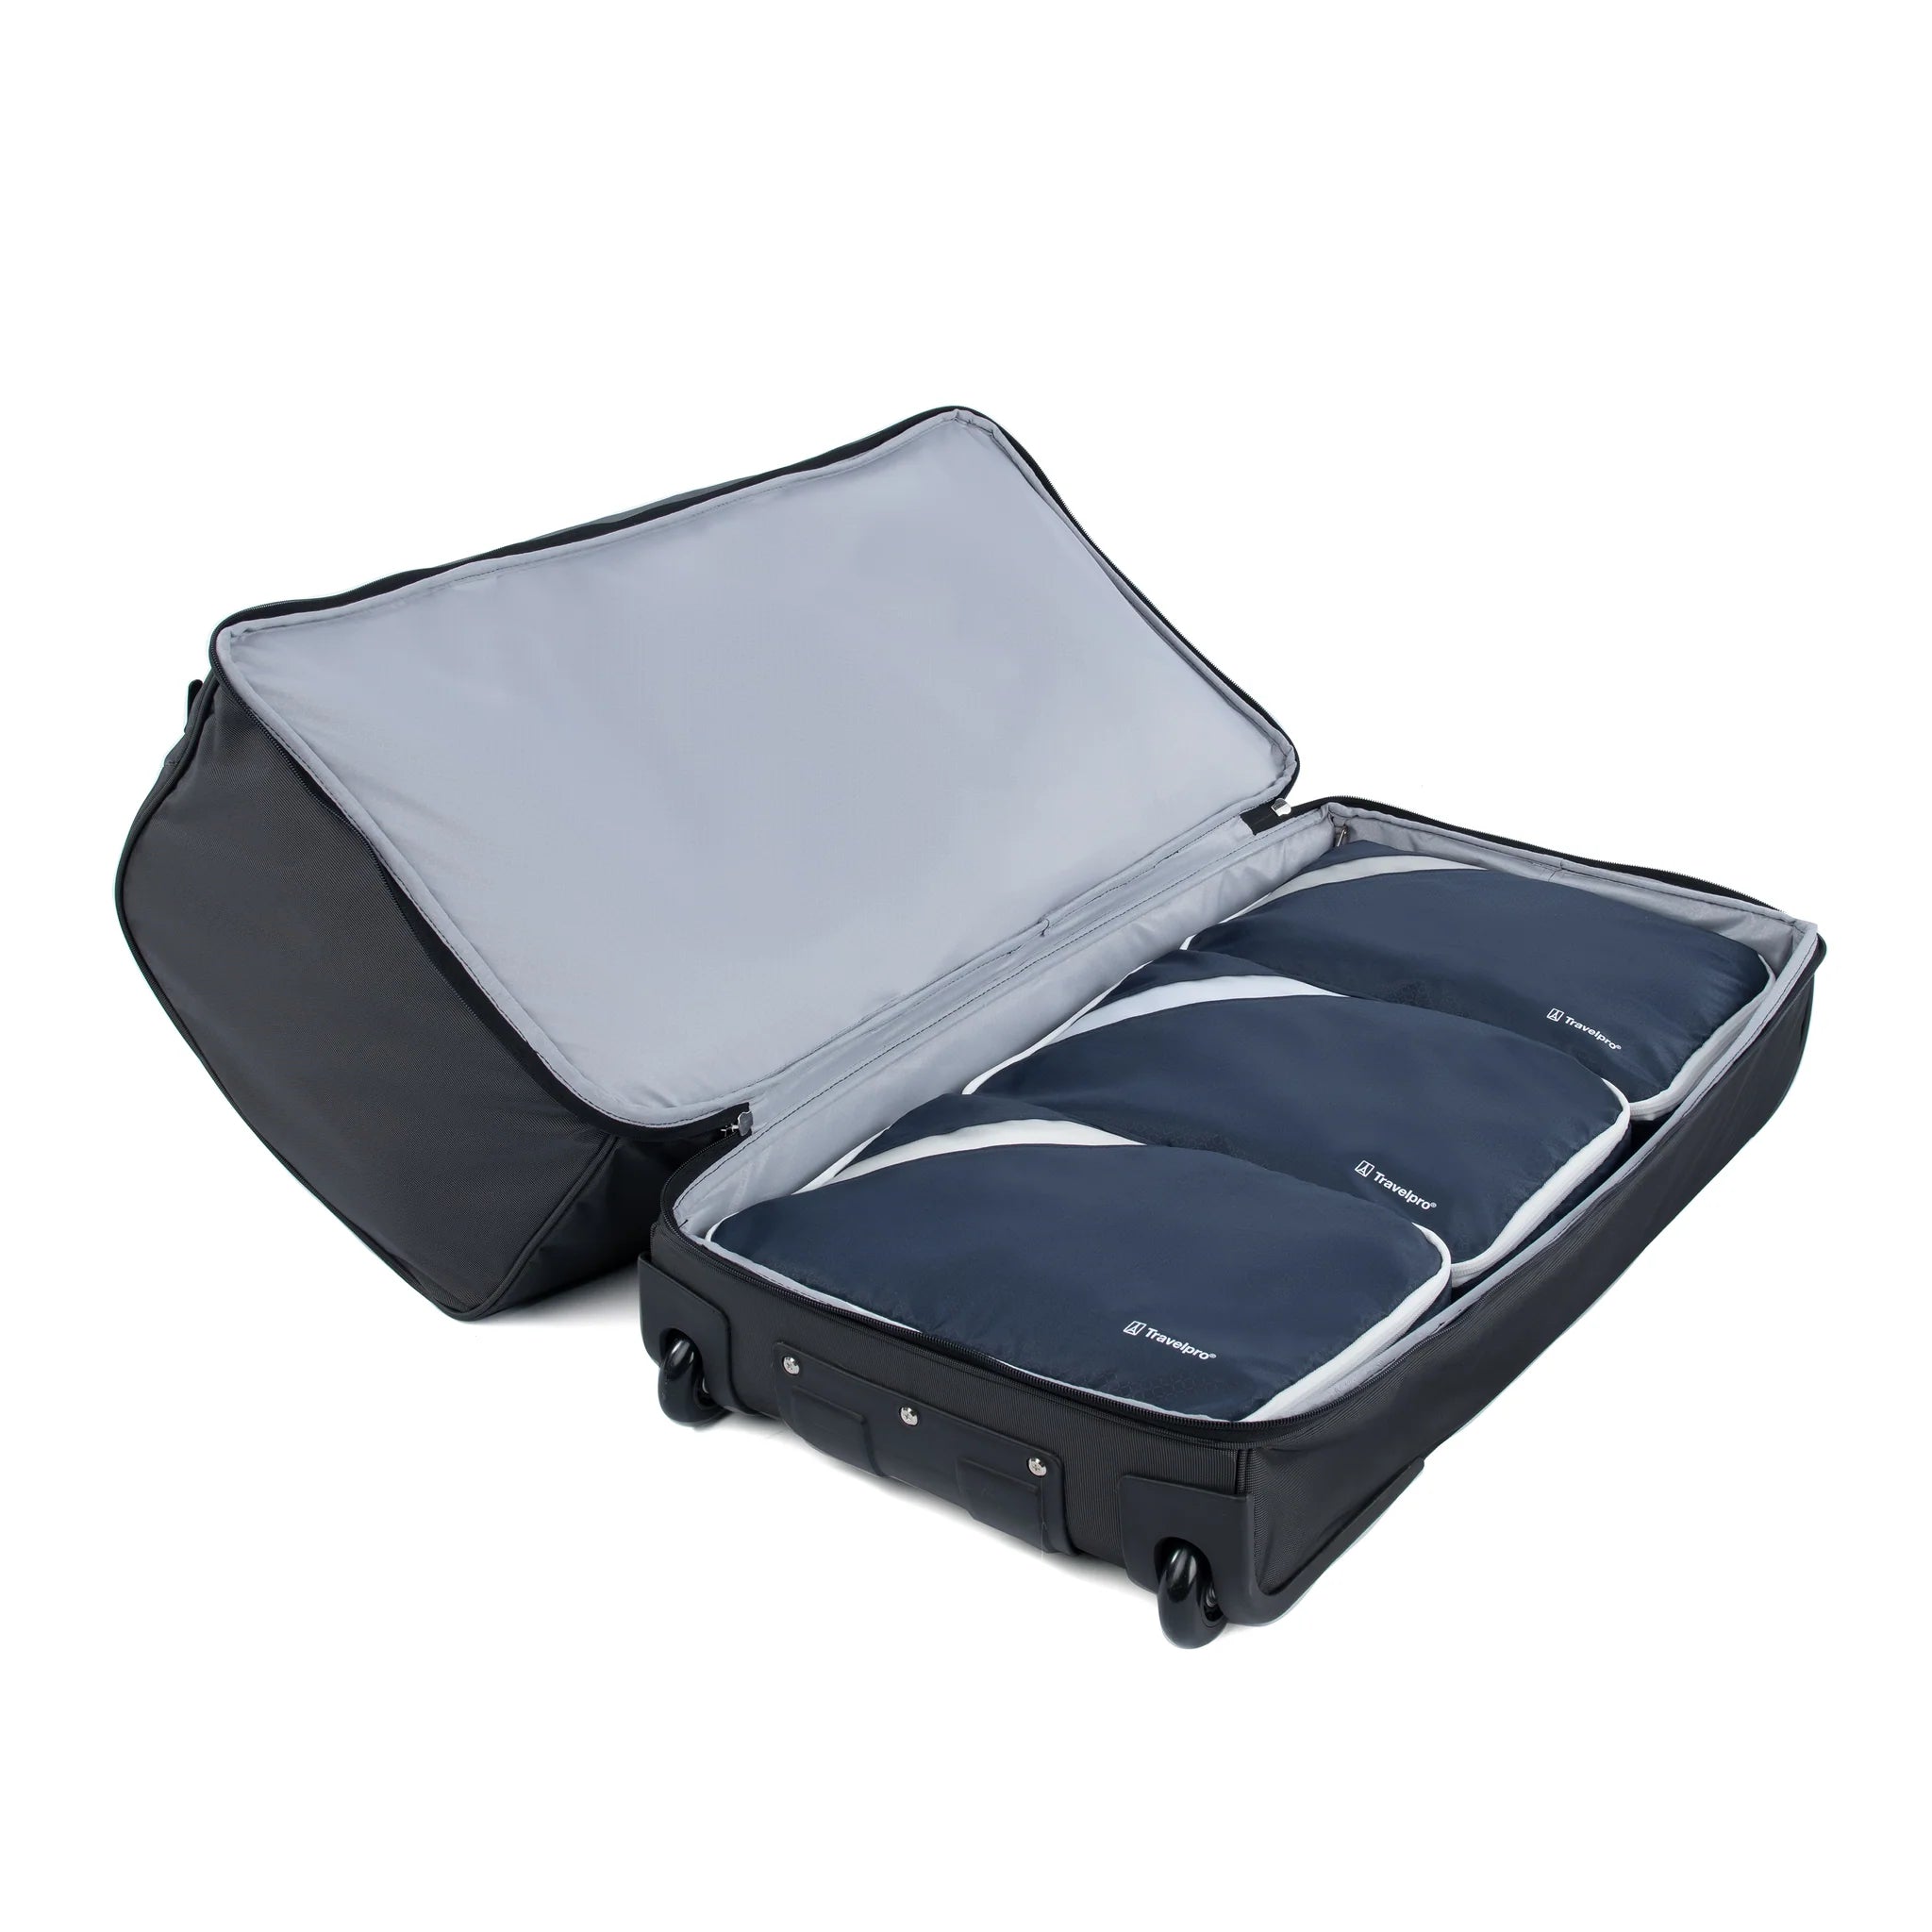 Travelpro Roadtrip 3 Pack Large Packing Cubes